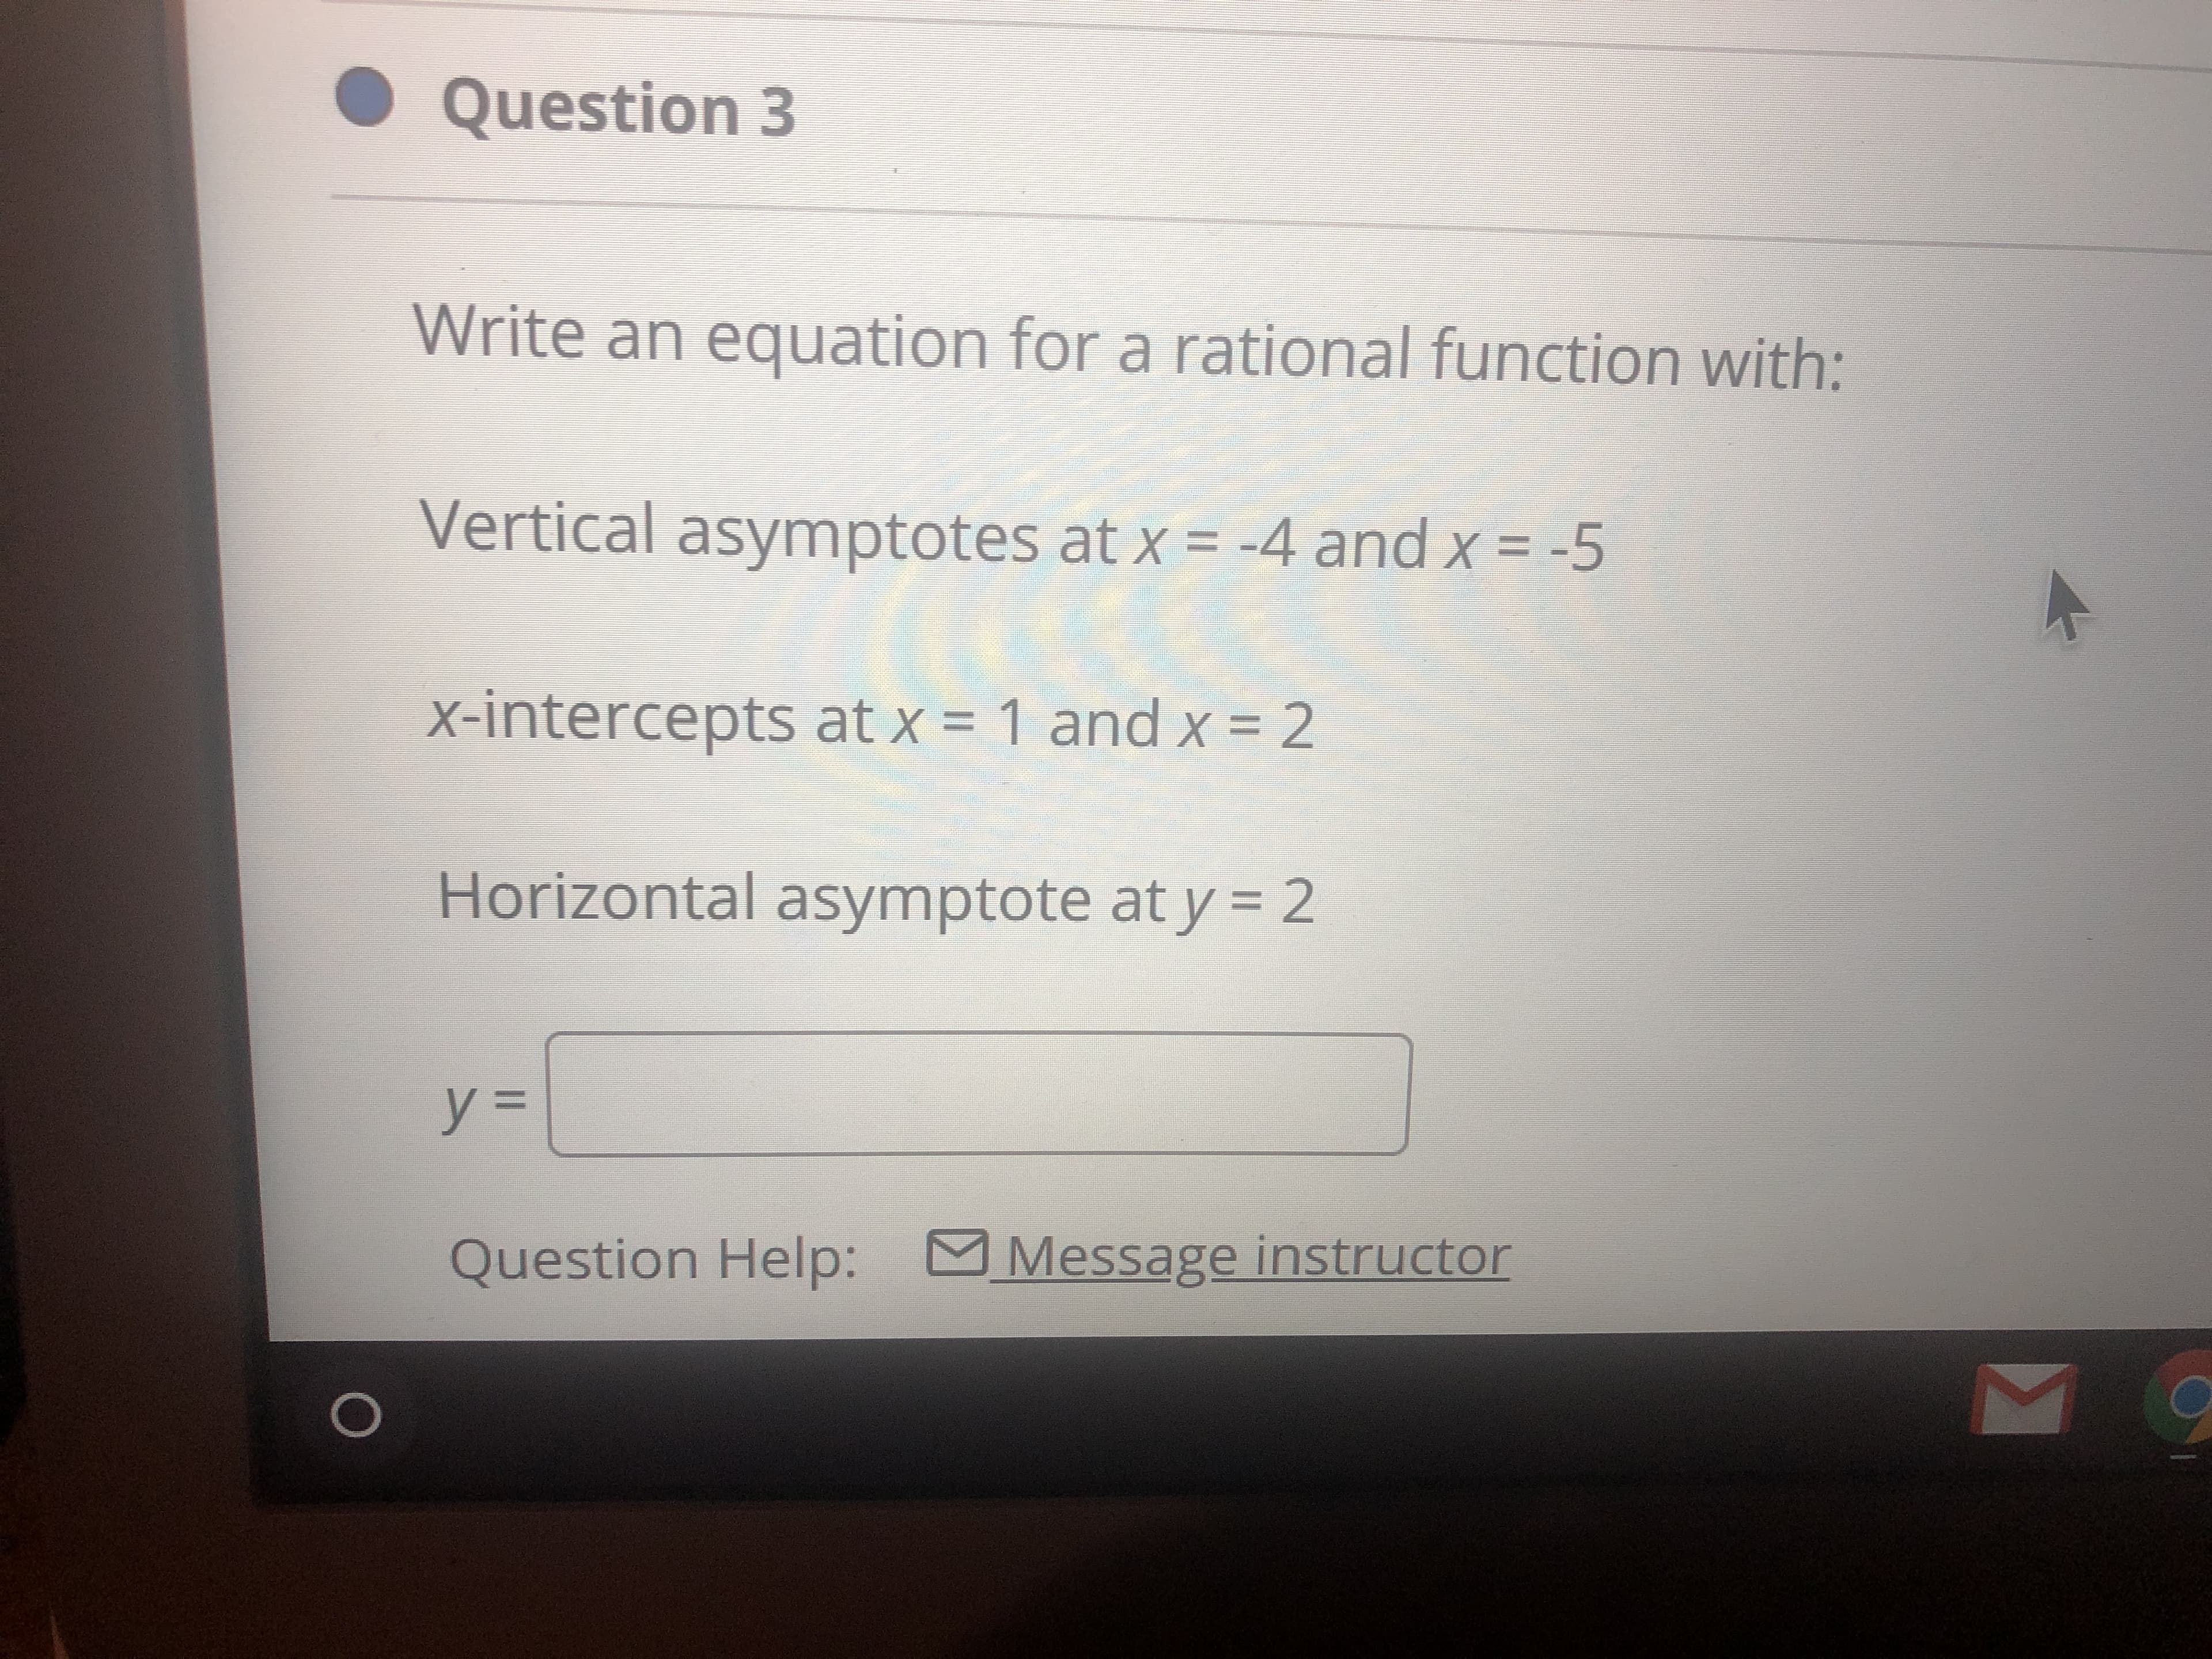 Write an equation for a rational function with:
Vertical asymptotes at x = -4 and x = -5
